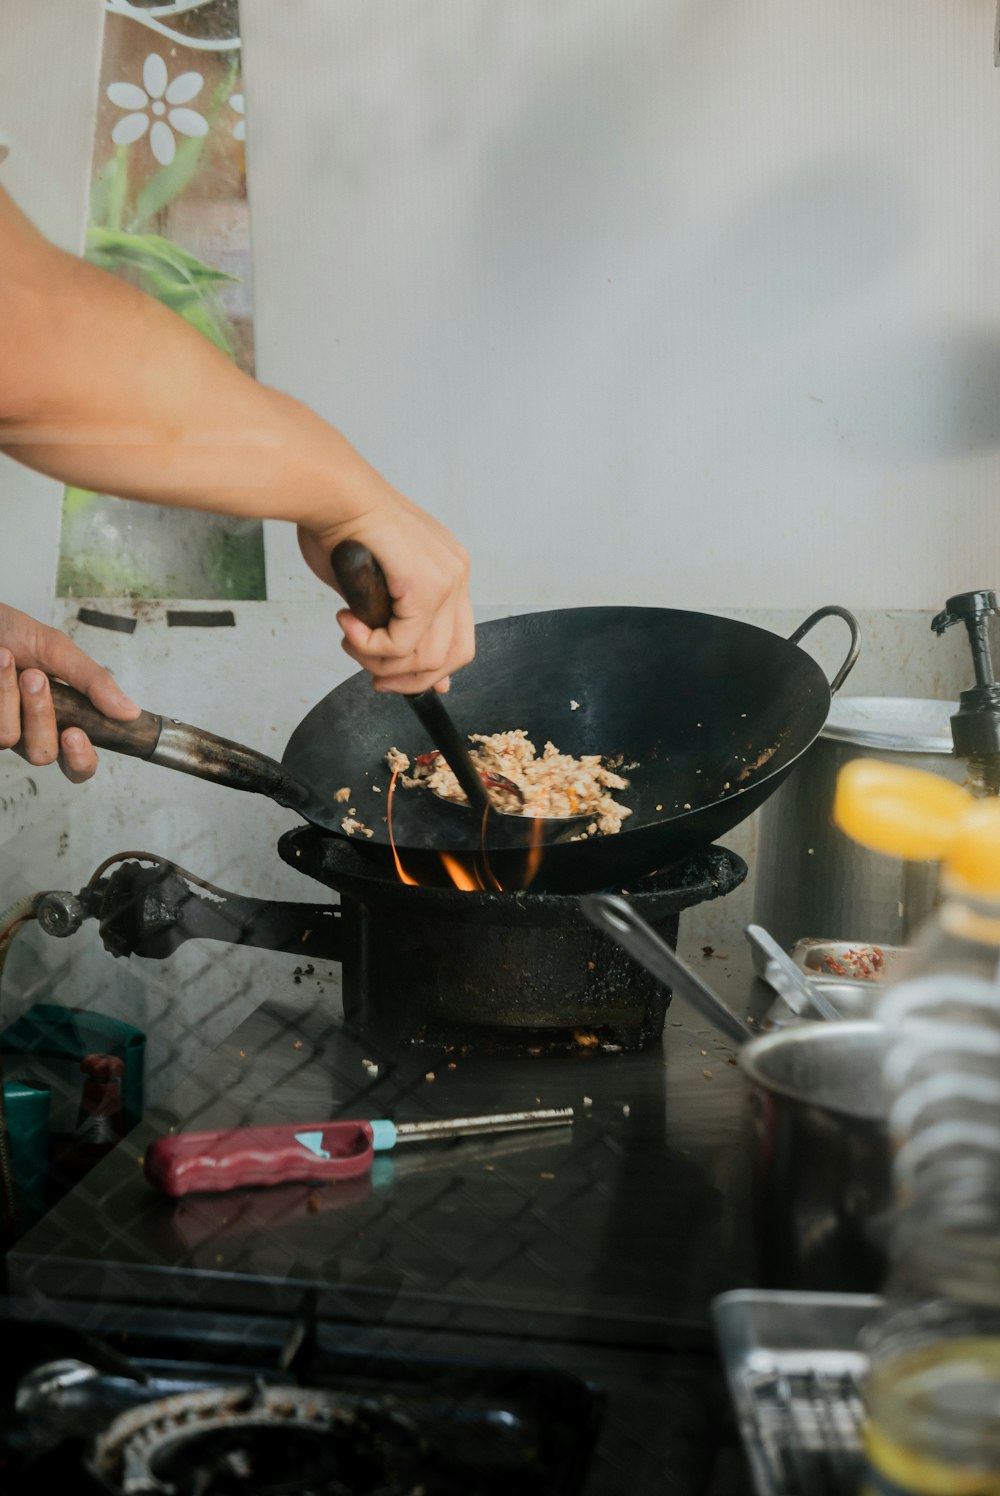 a person cooking food in a wok on a stove